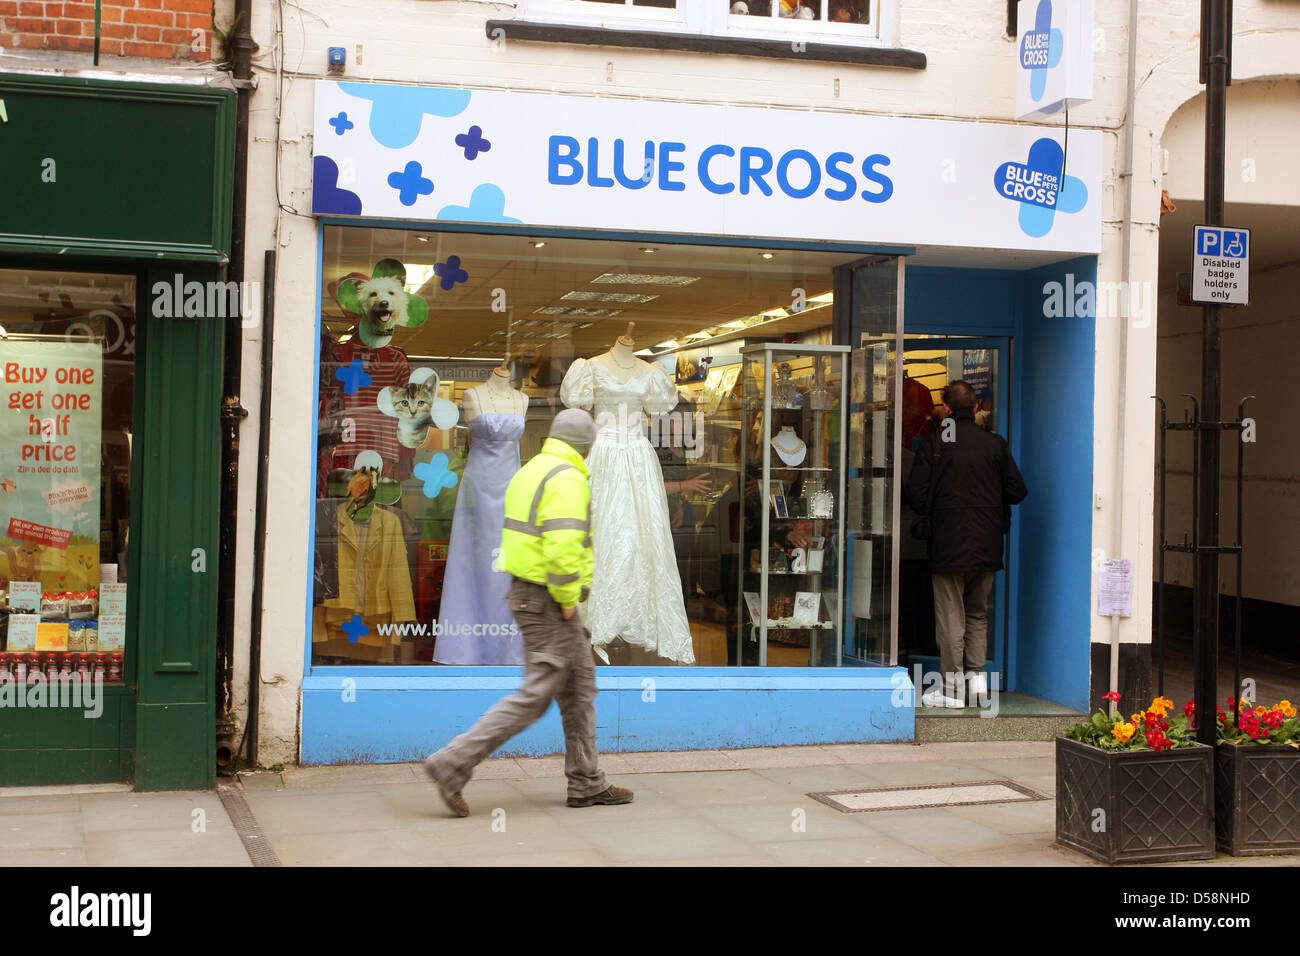 Man walking past the Blue cross animal charity shop on the high street in Wells, Somerset, March 2013 Stock Photo